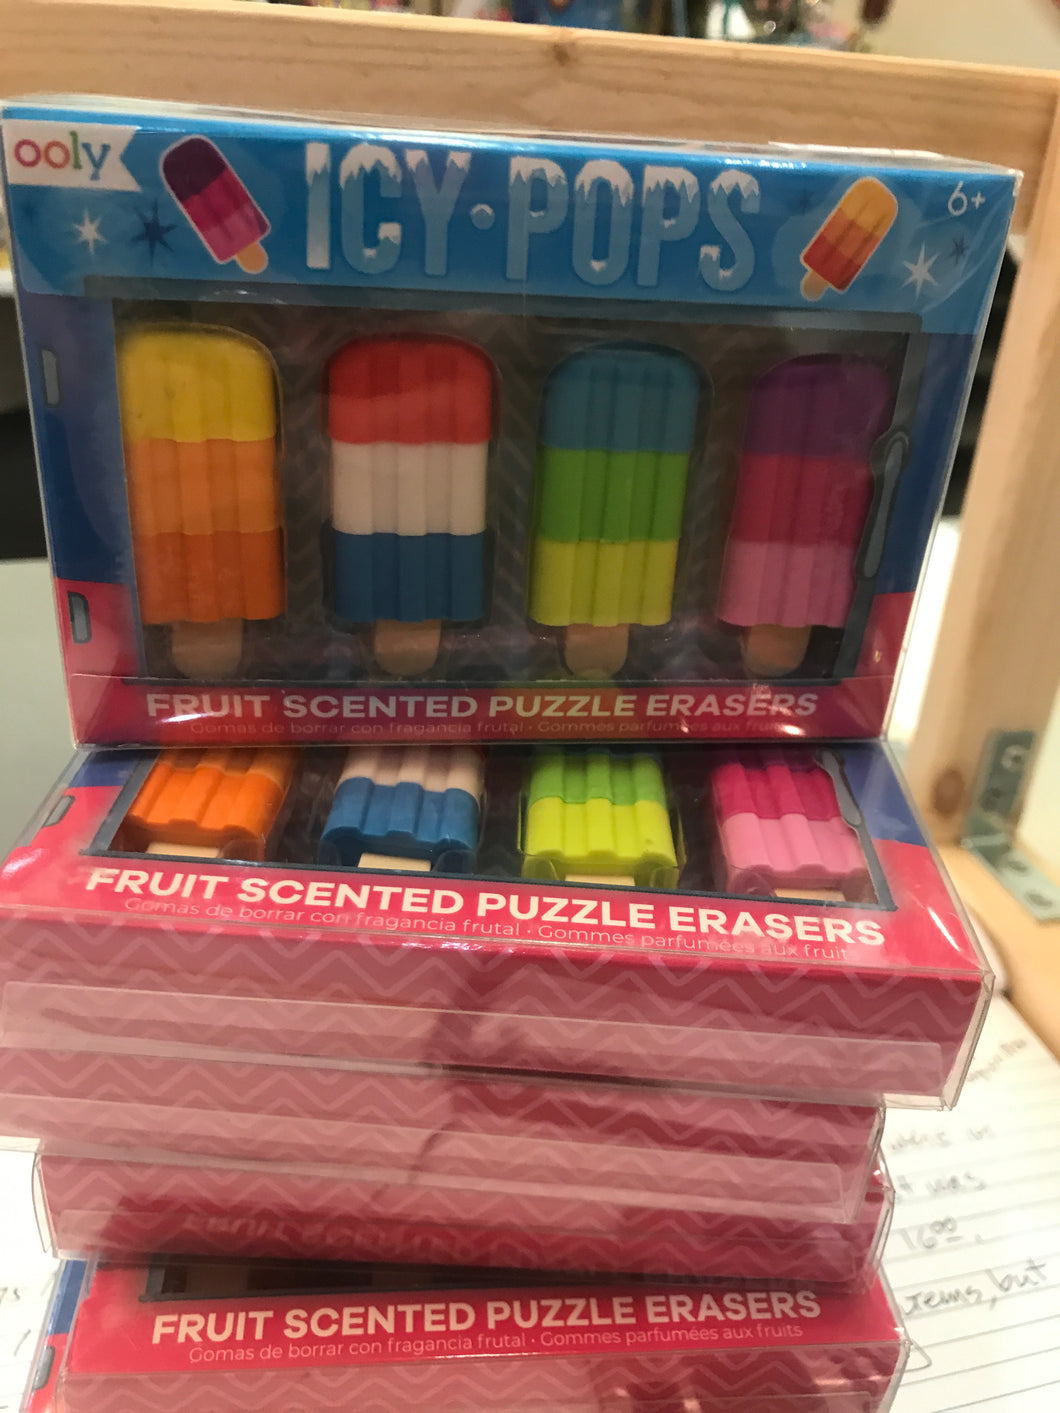 ooly - Icy Pops Fruit Scented Puzzle Erasers